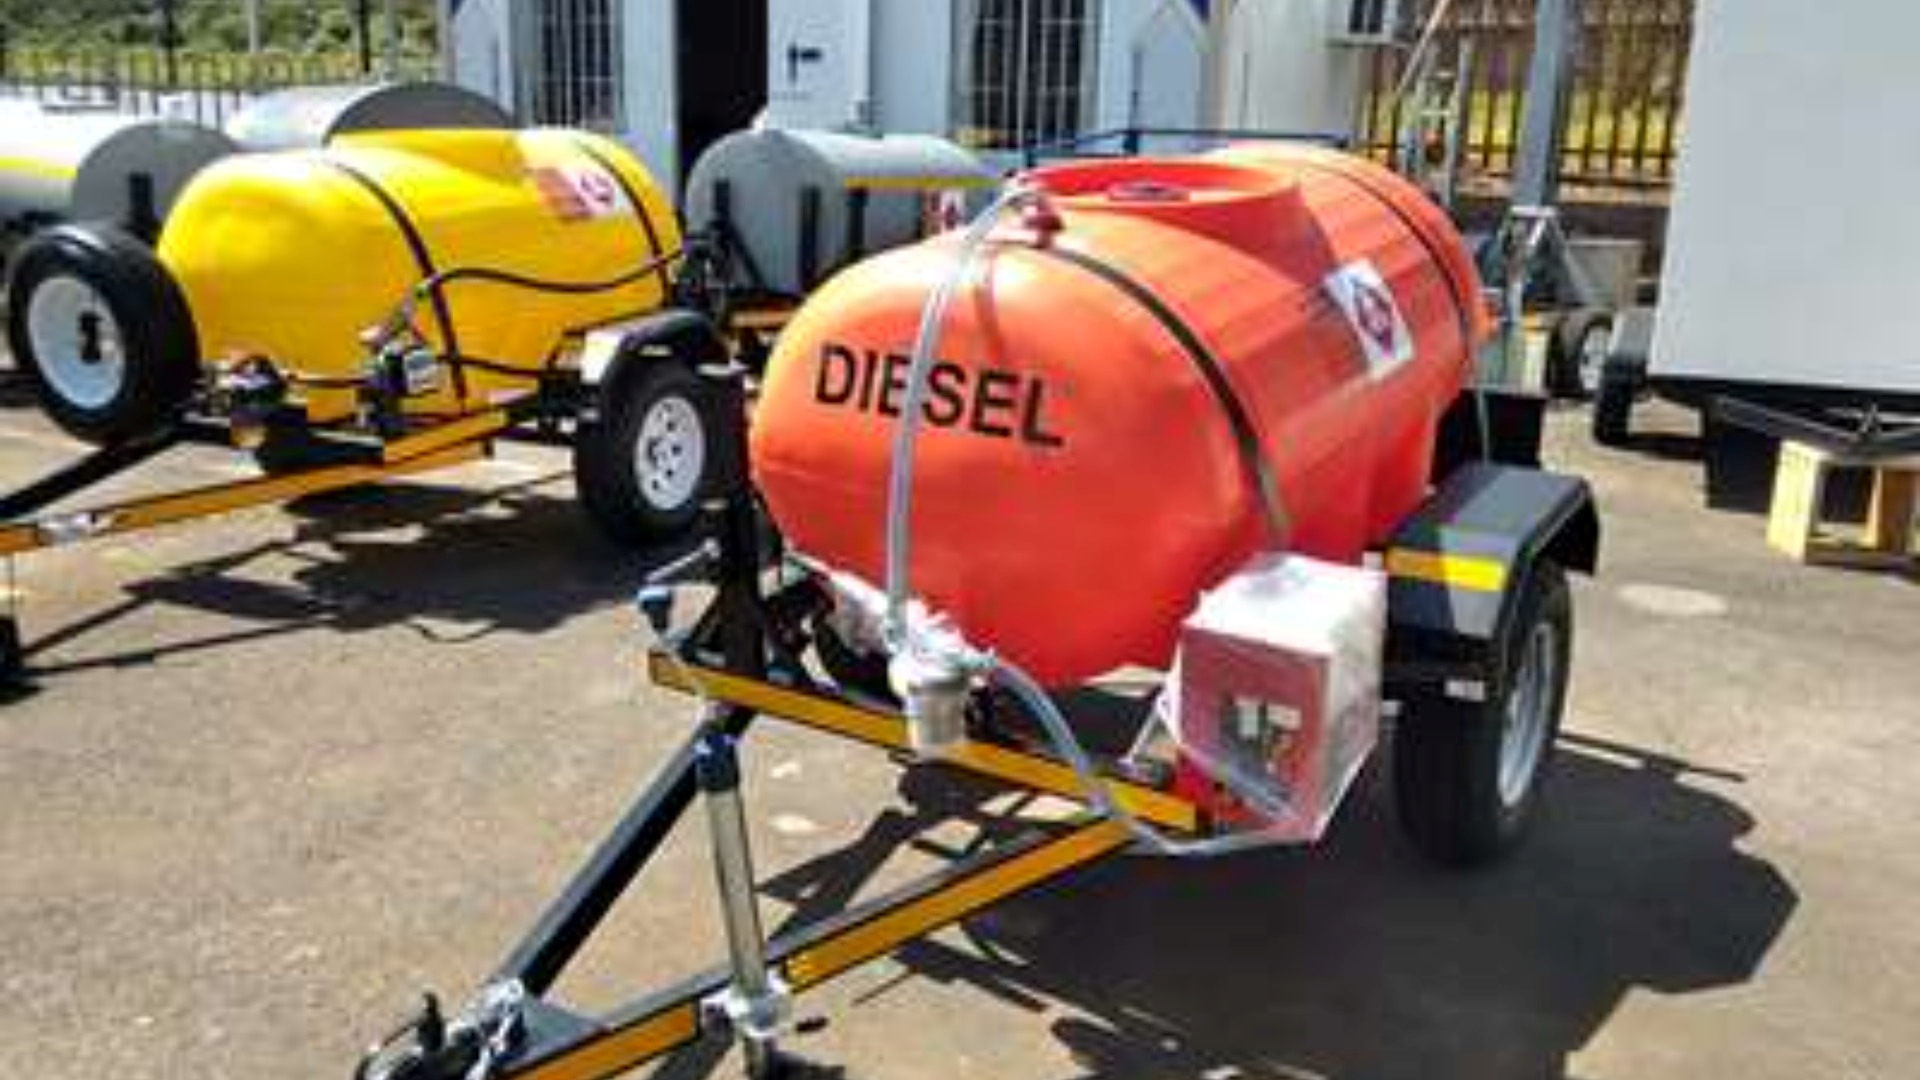 Custom Diesel bowser trailer 1000 LITRE  PLASTIC DIESEL/WATER BOWSER  76x3 2022 for sale by Jikelele Tankers and Trailers   | Truck & Trailer Marketplaces